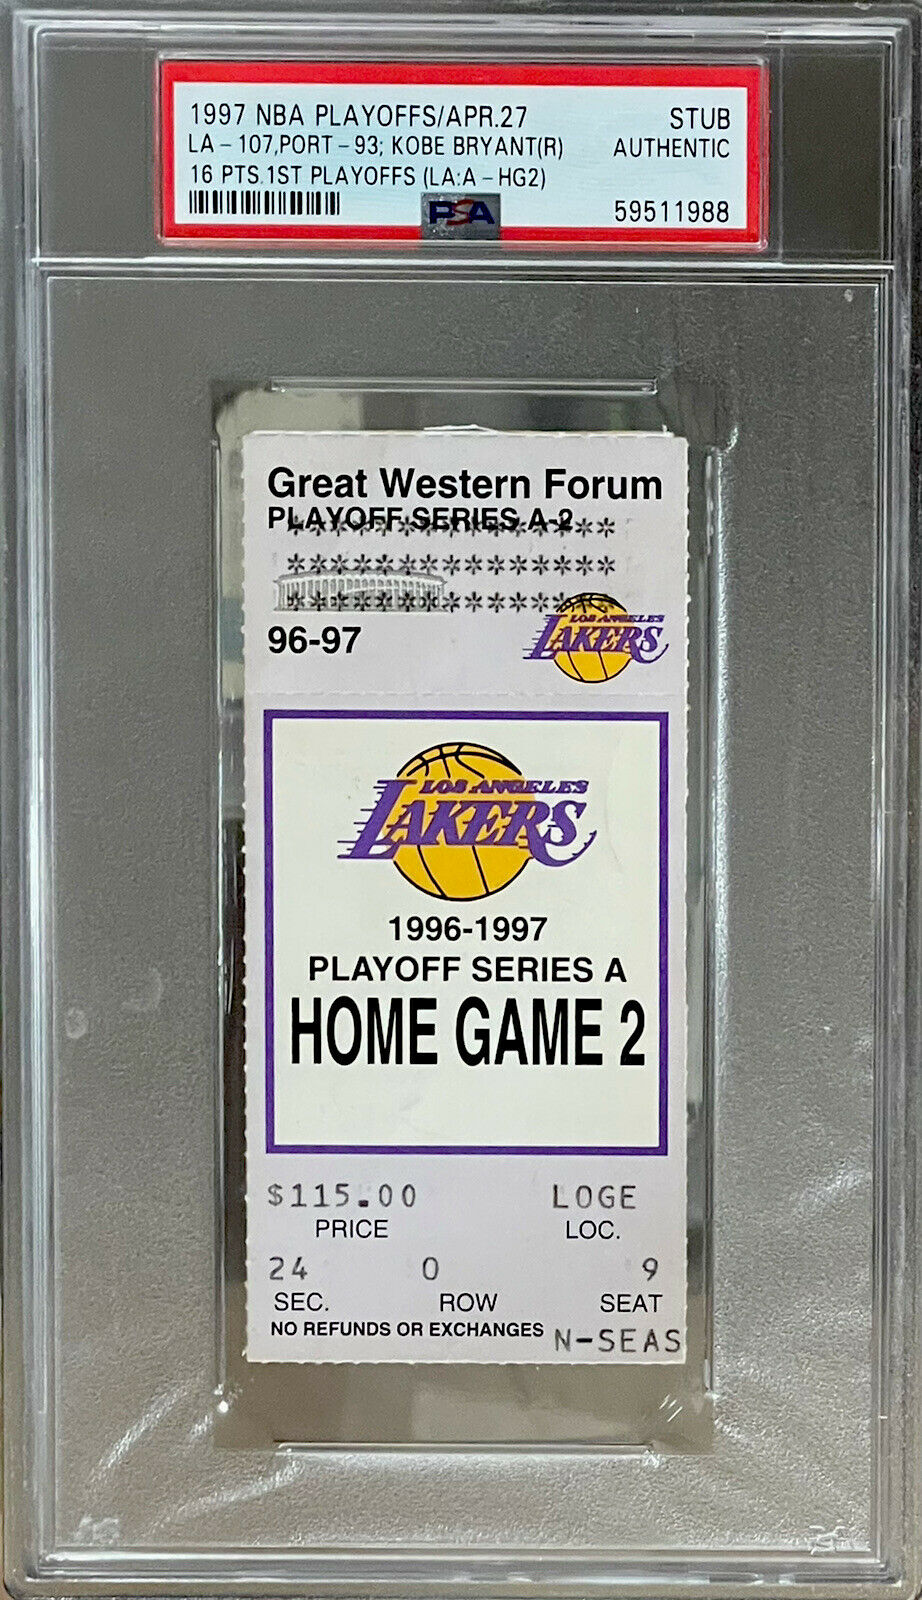 LOS ANGELES LAKERS 1965 Reprint Ticket Stub 1965 NBA Playoffs + 2 Trading  Cards